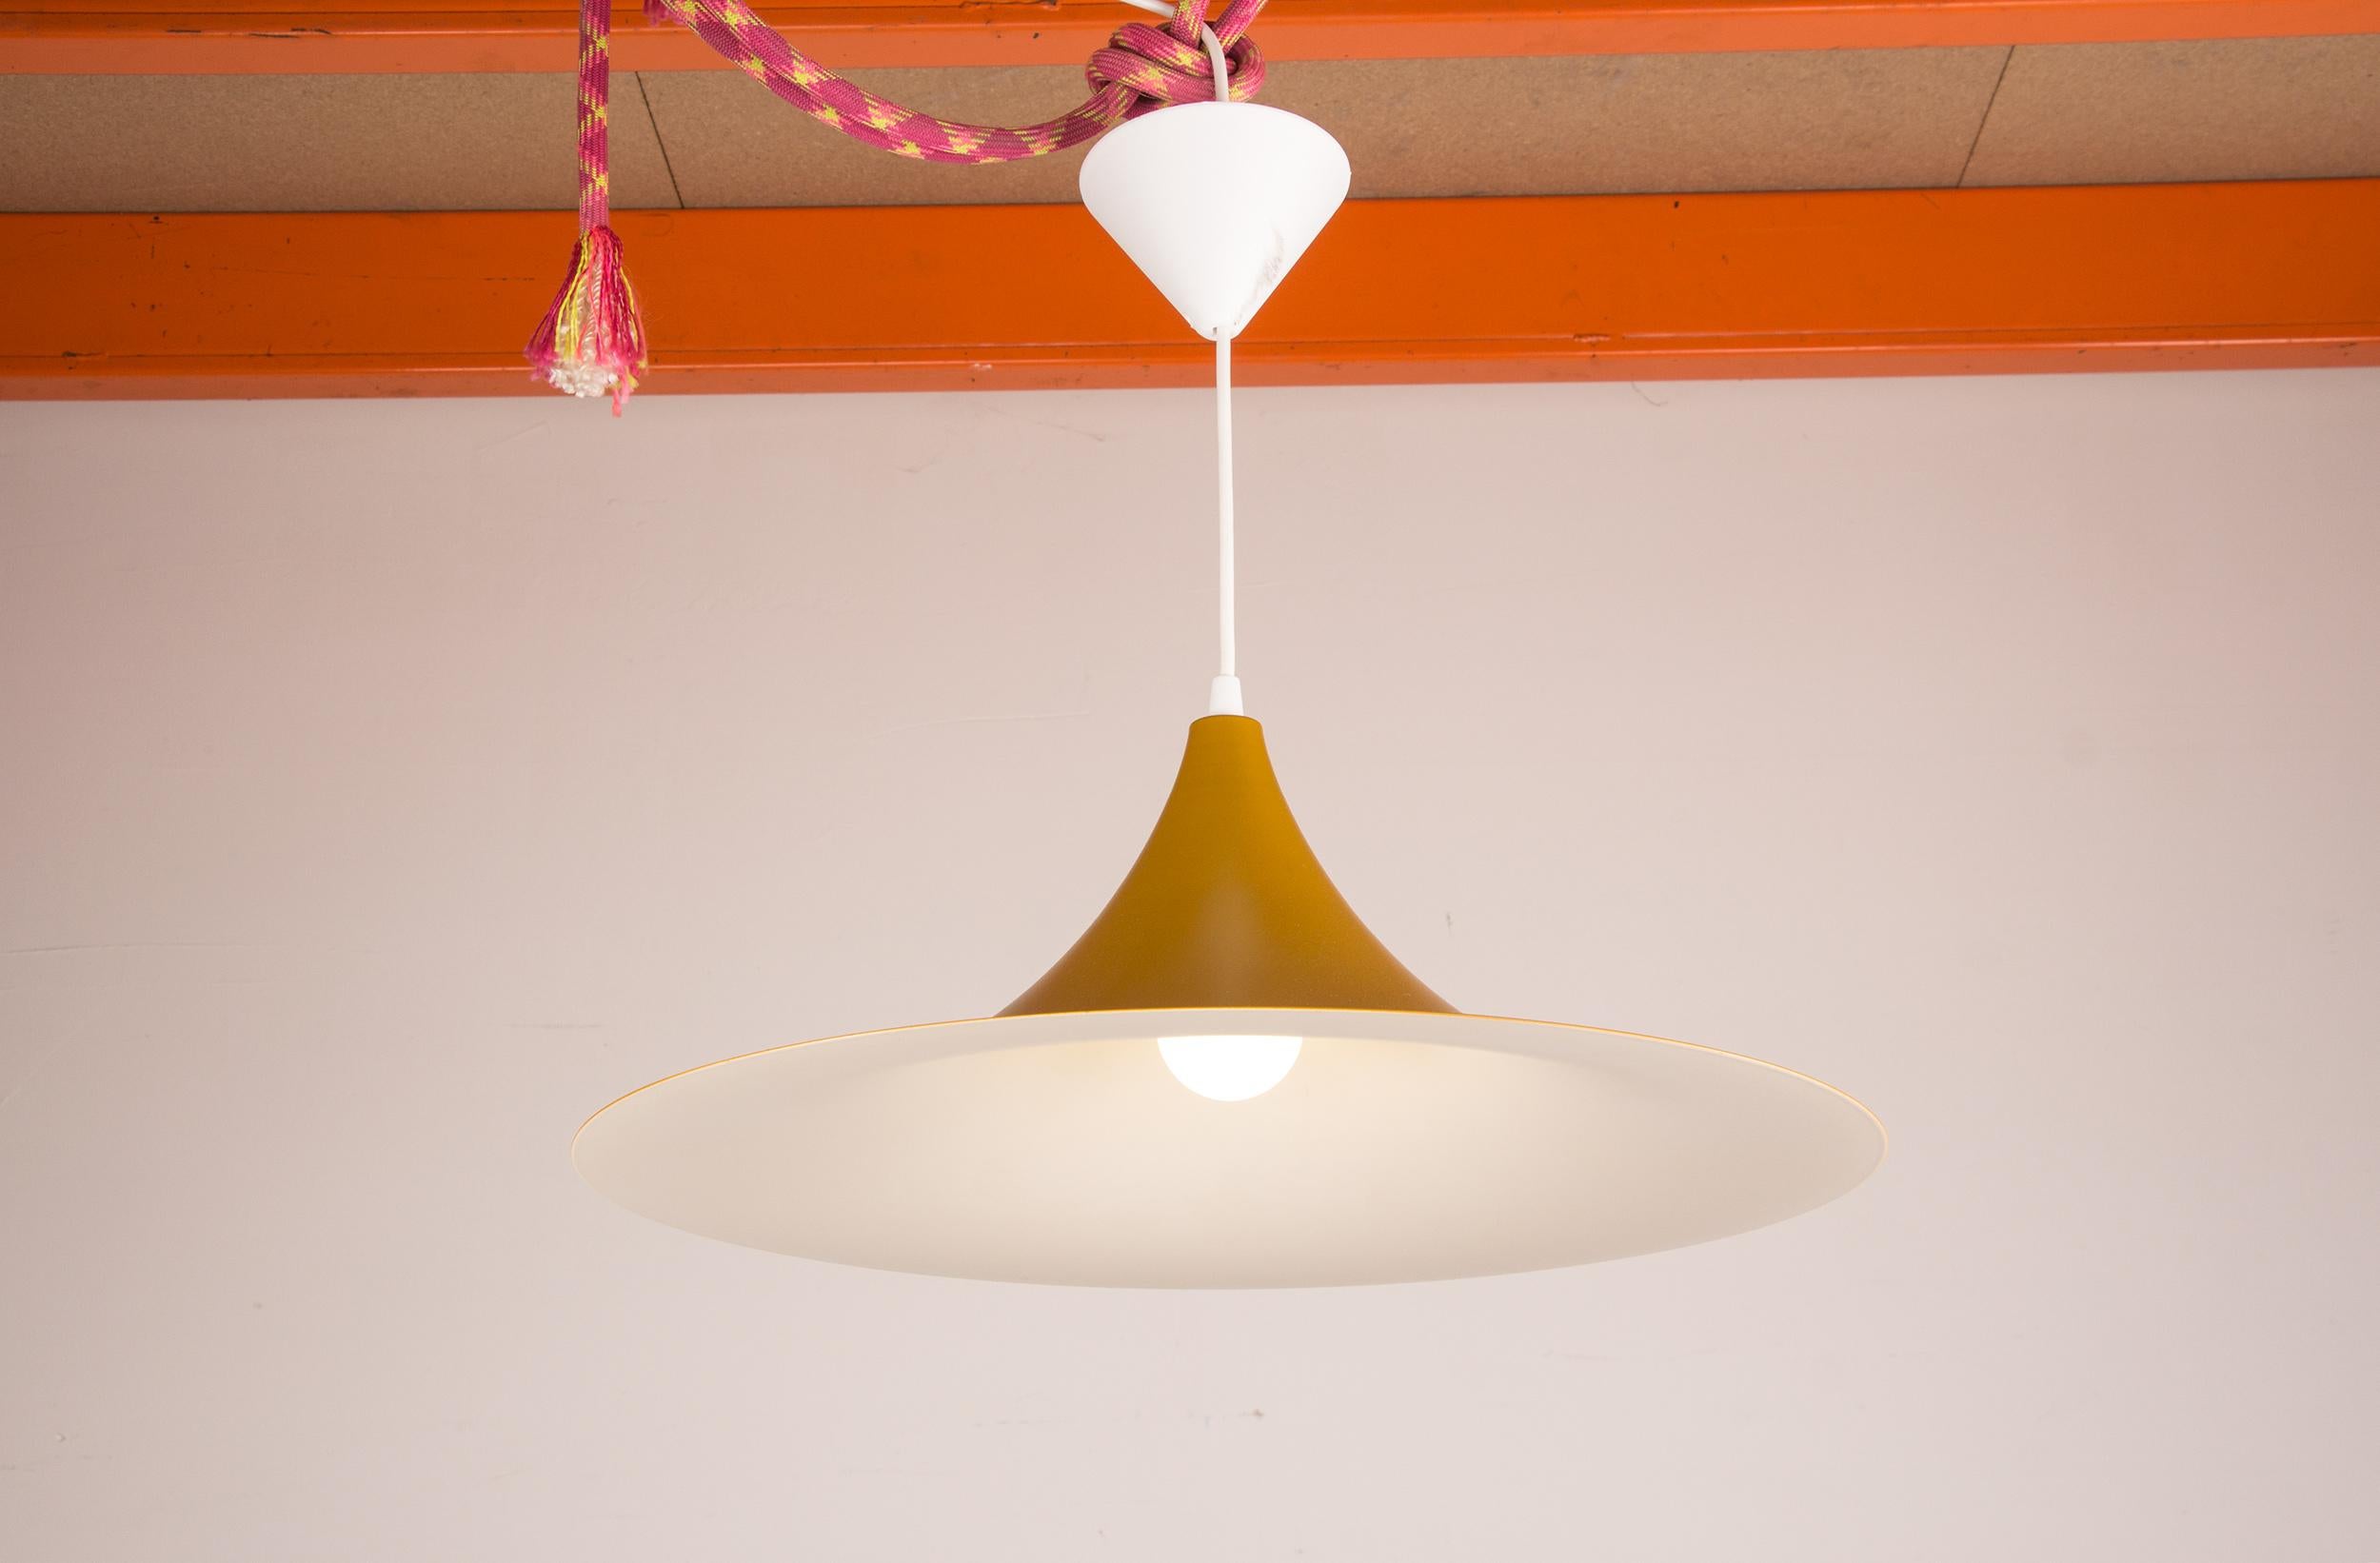 Scandinavian metal pendant light, reissue of a model by Claire Bonderup and Torsten Thorup designed in the 60s. Very elegant, this pendant light offers diffused lighting over a large area. Almost new condition, very beautiful workmanship.
